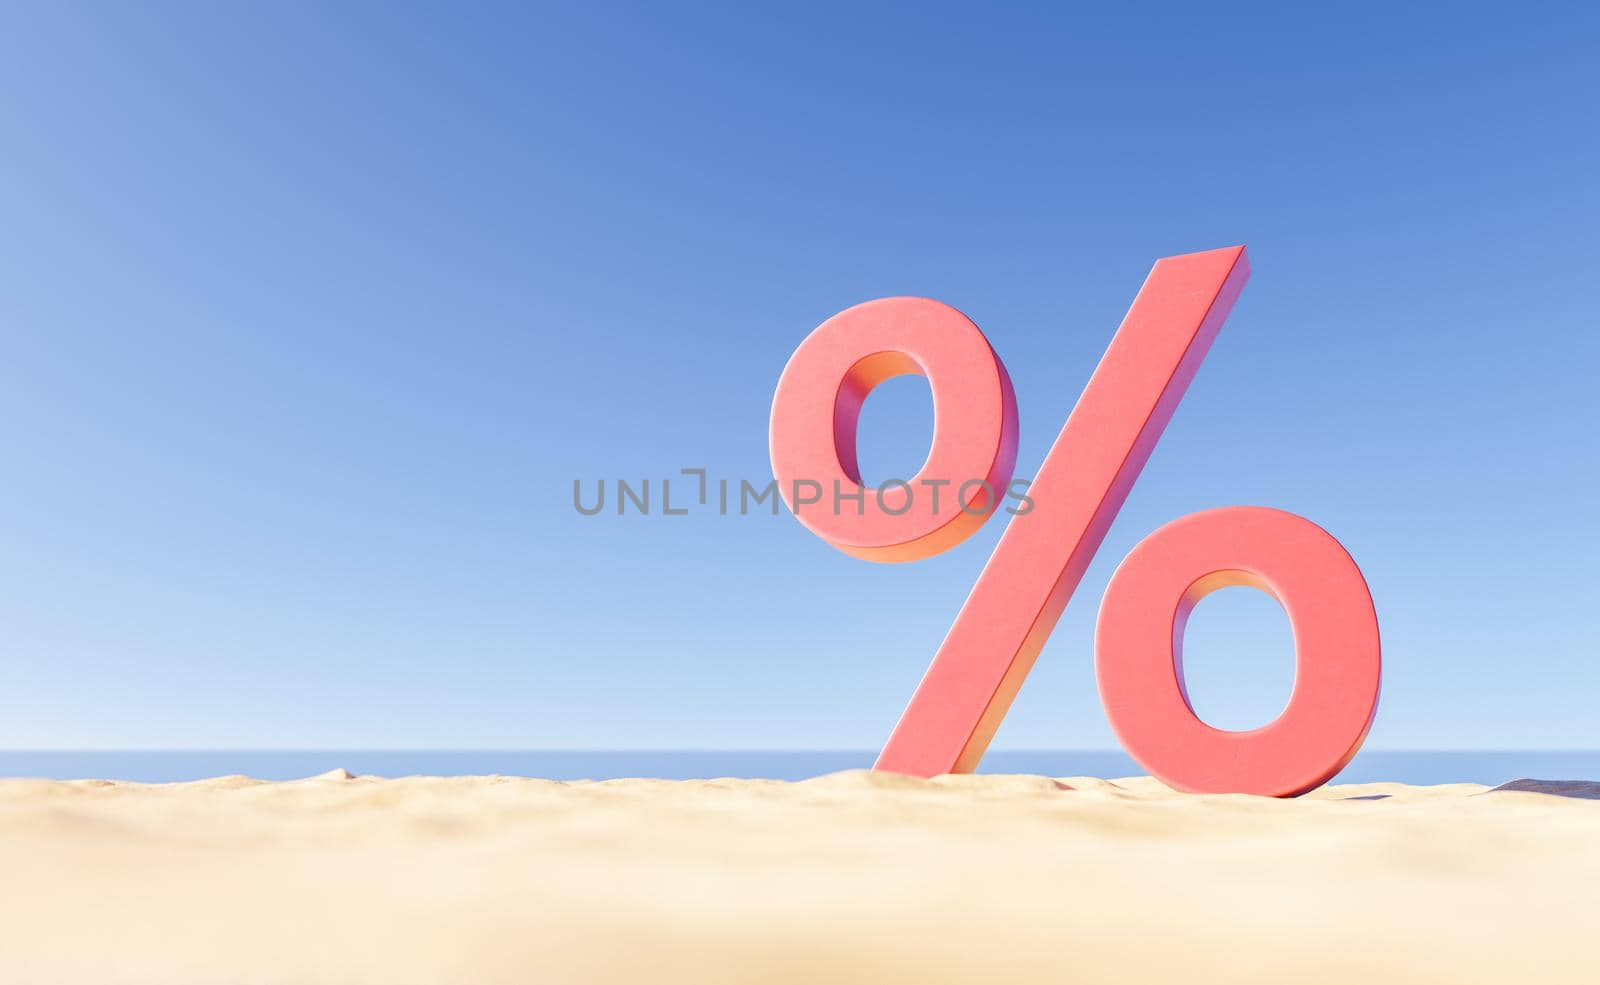 Large percent sign on sandy seashore in sunny day by asolano